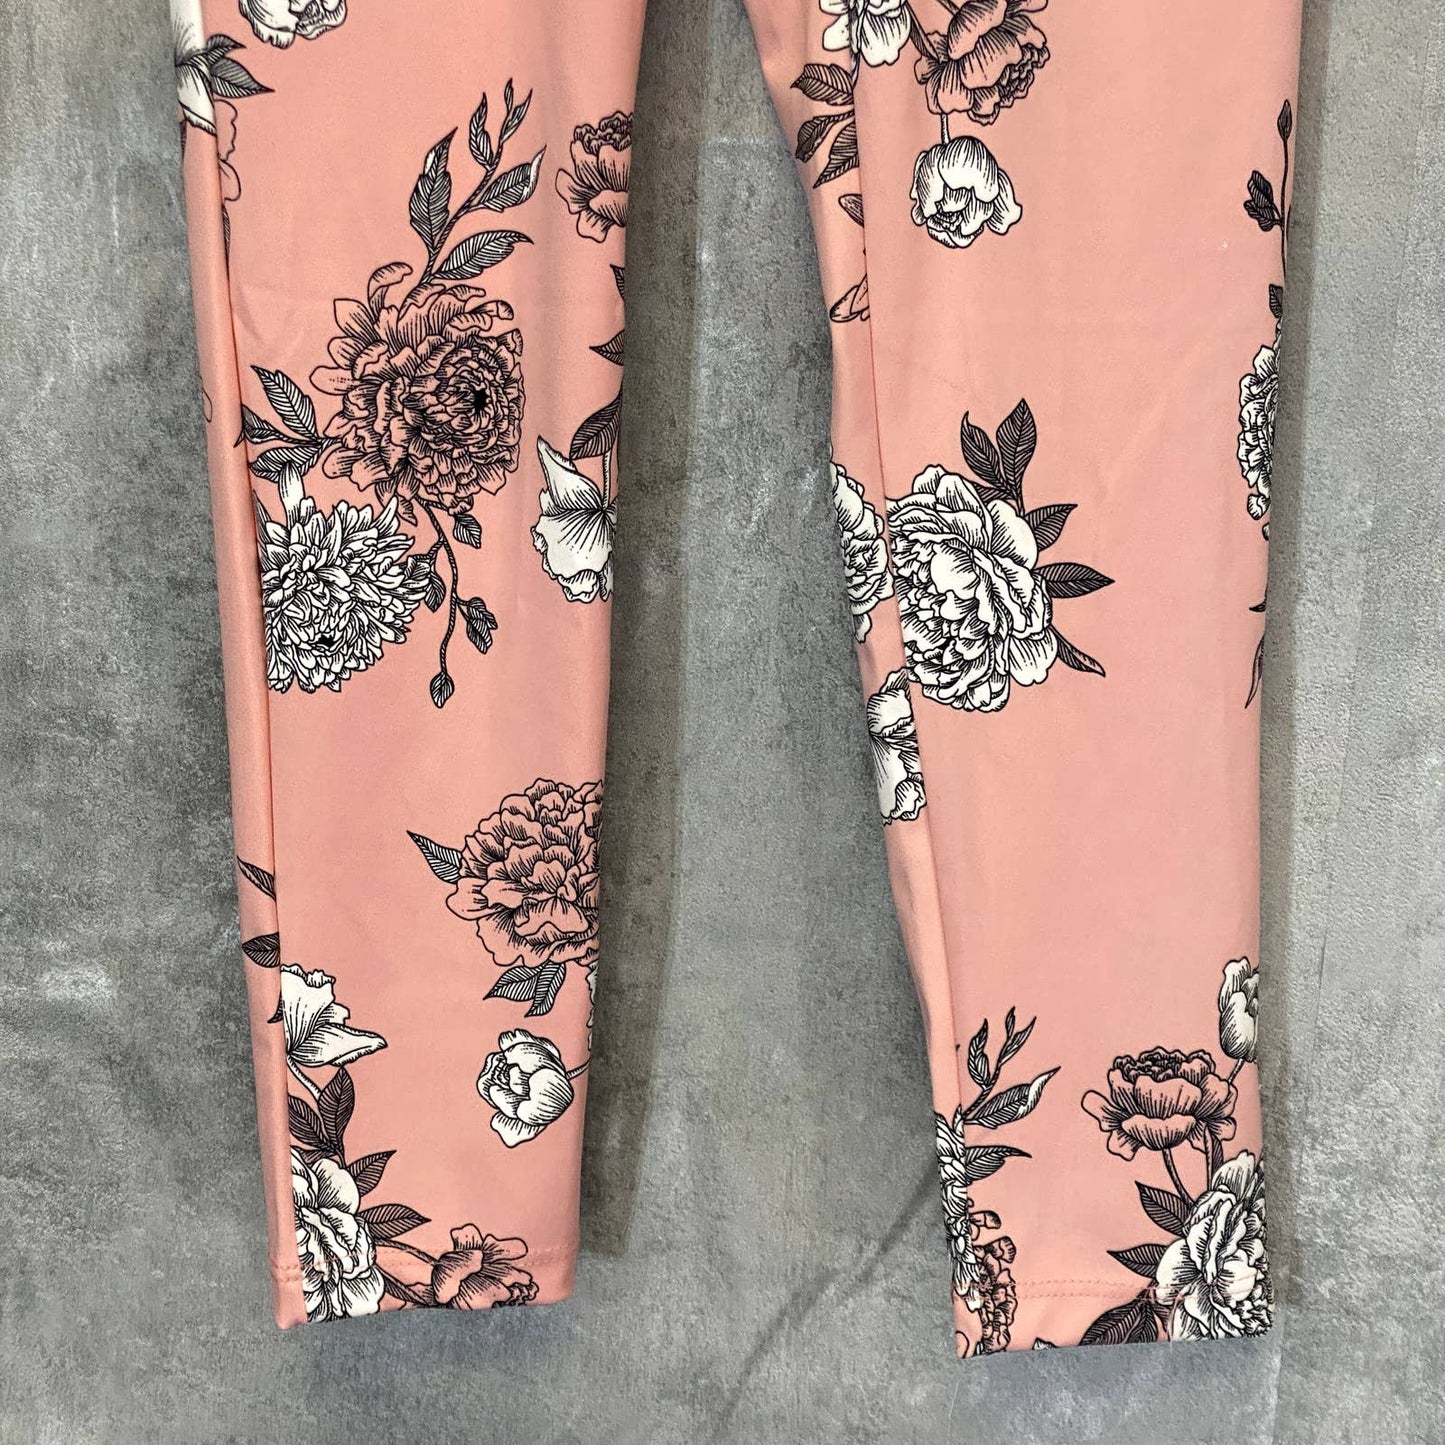 KAY UNGER Women's Pretty Peony Peach Floral Print High-Rise Pull-On Leggings SZ S